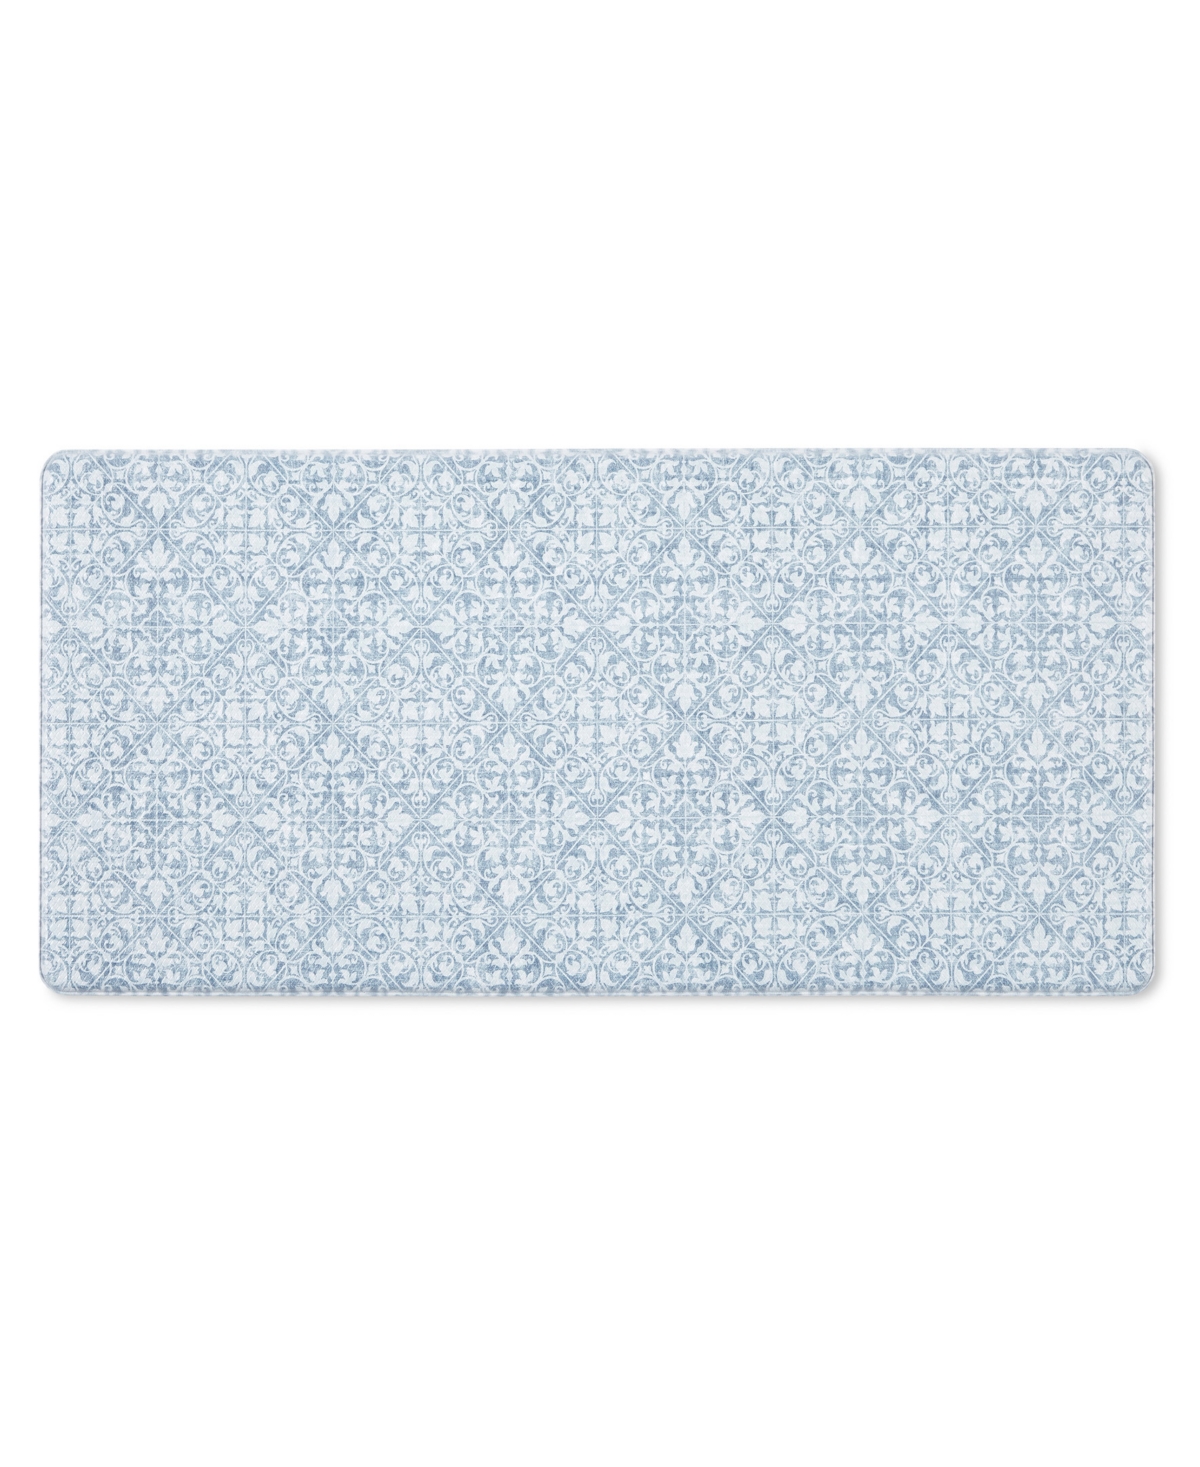 Town & Country Living Basics Comfort Plus Kitchen Mat 26782 1'6" X 3'3" Area Rug In Blue